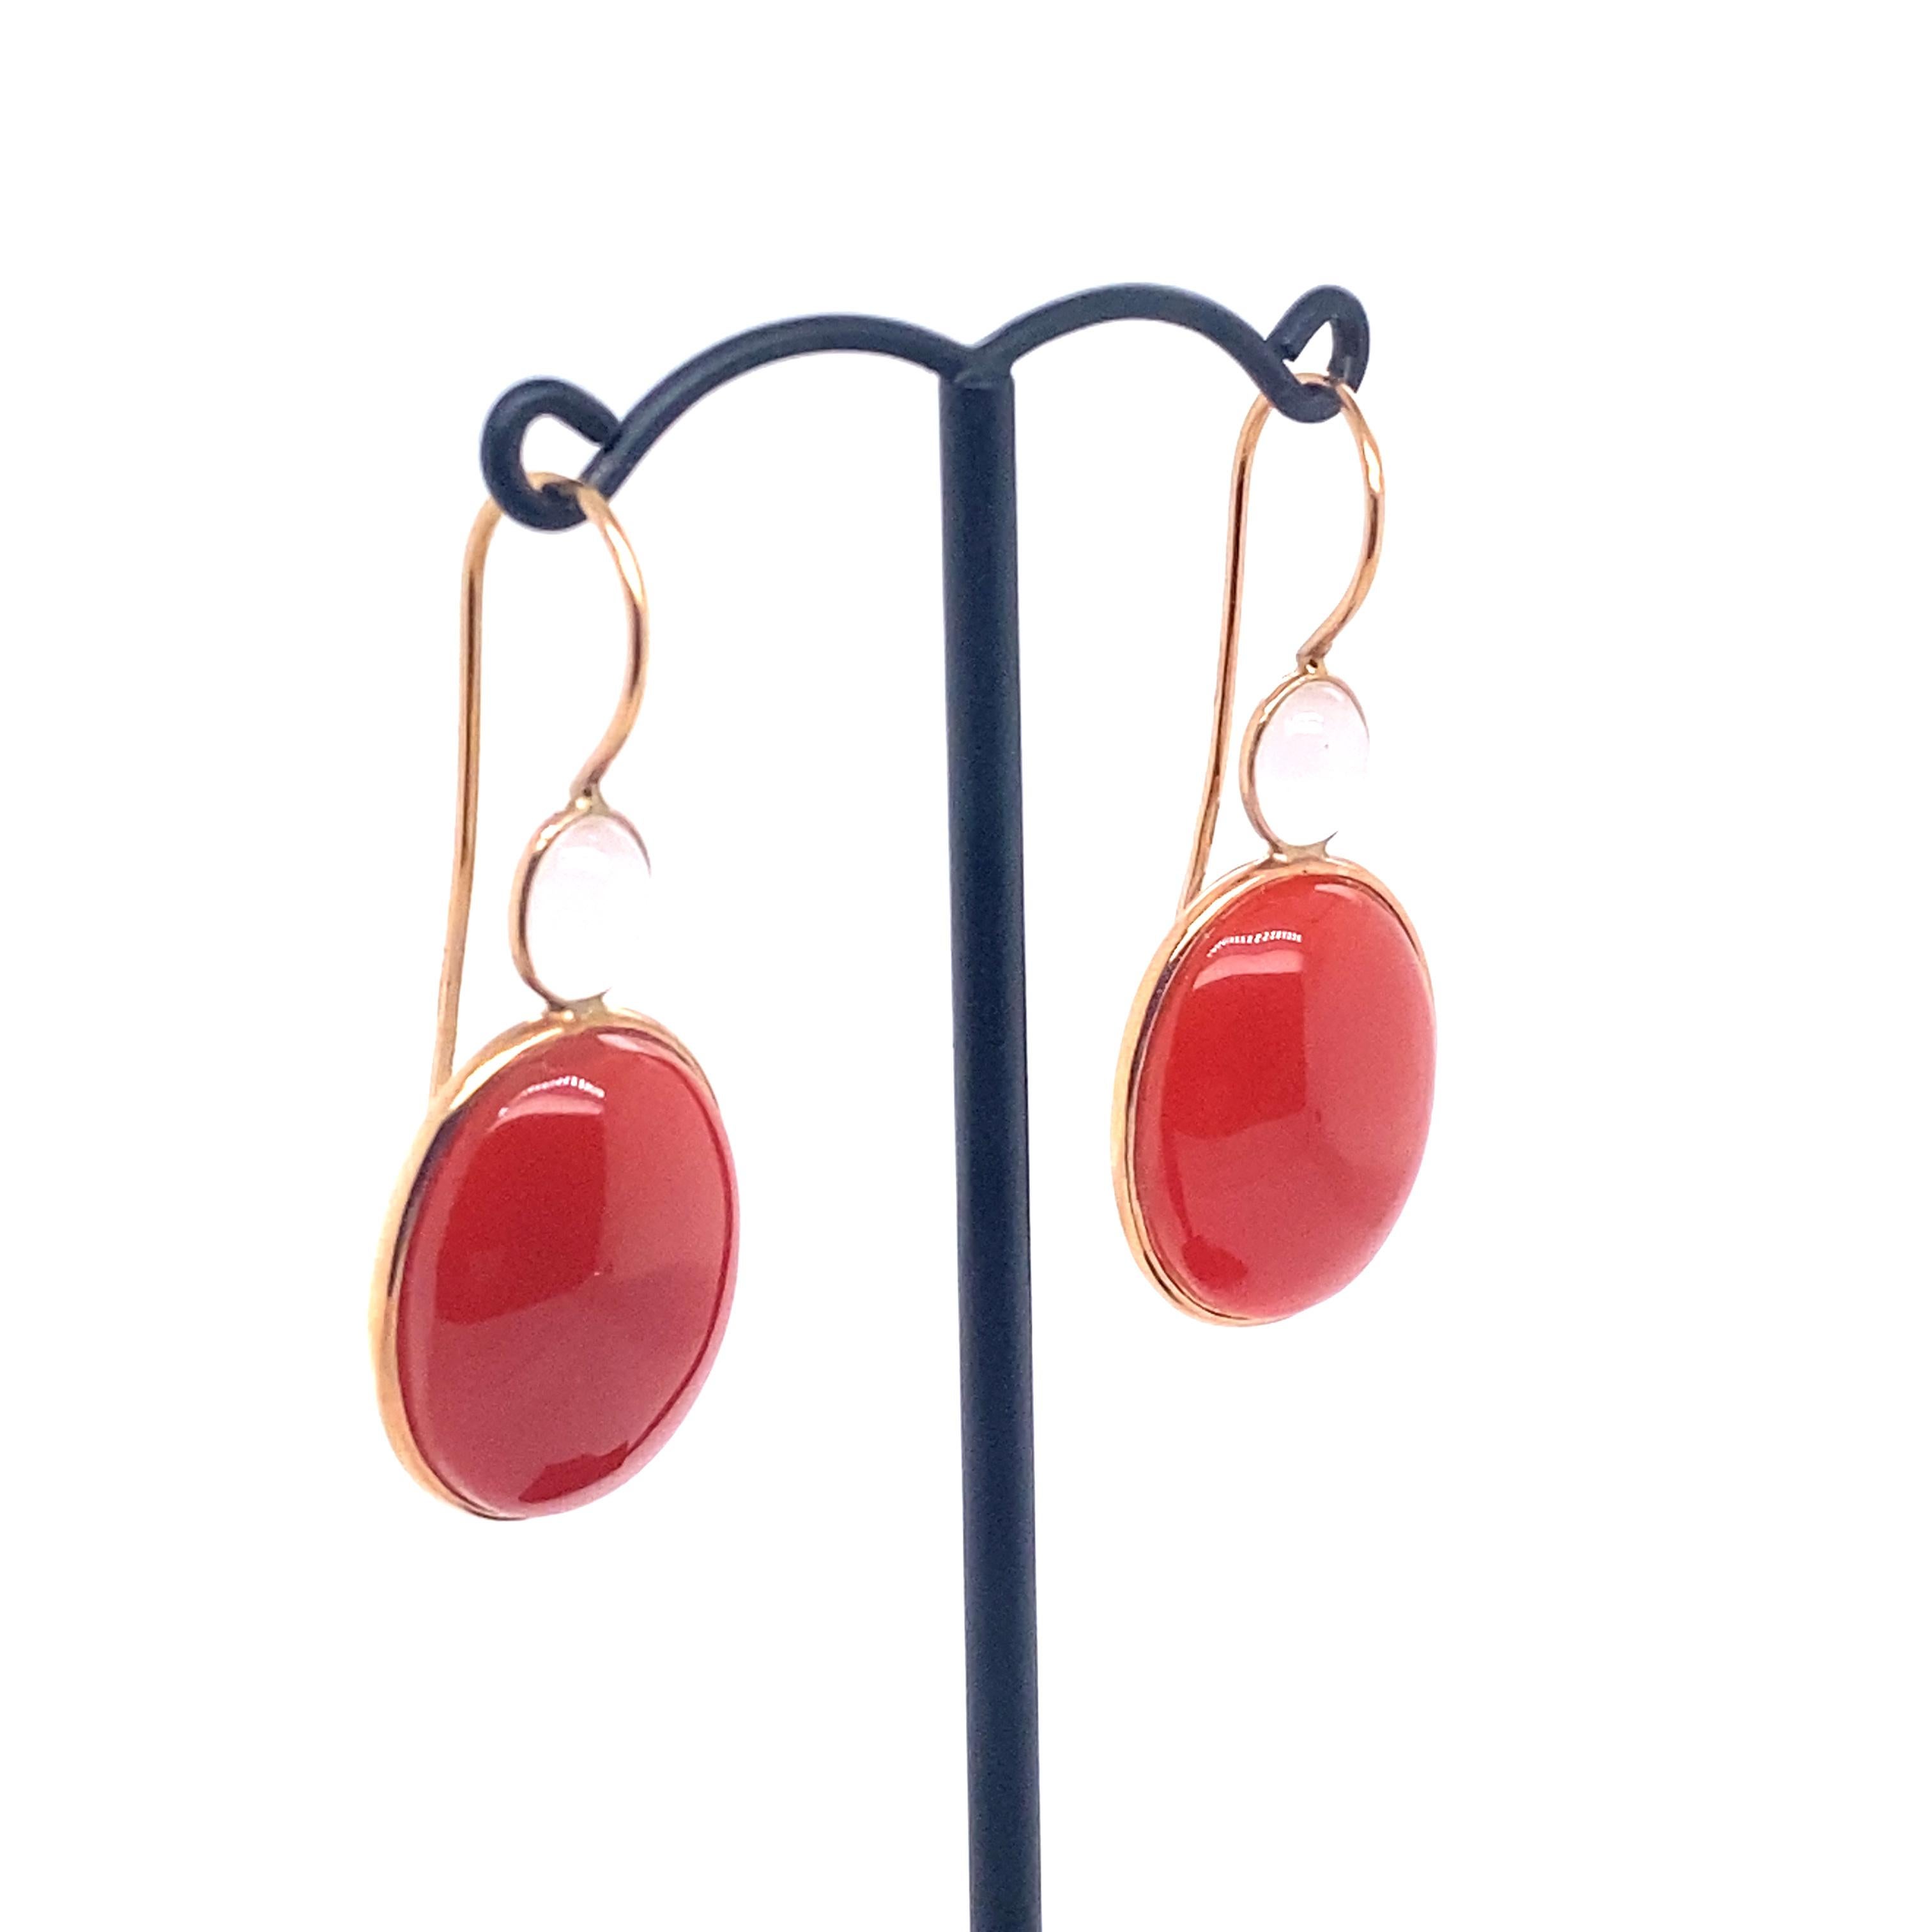 18 Karats Pink Gold Red Agatha Chandelier Earings with Grey Quartz.

French Chandelier earrings. The stones are cut in the shape of cabochon and reflect the light. The whole is very light. 
The stones are lined on the back with a thin